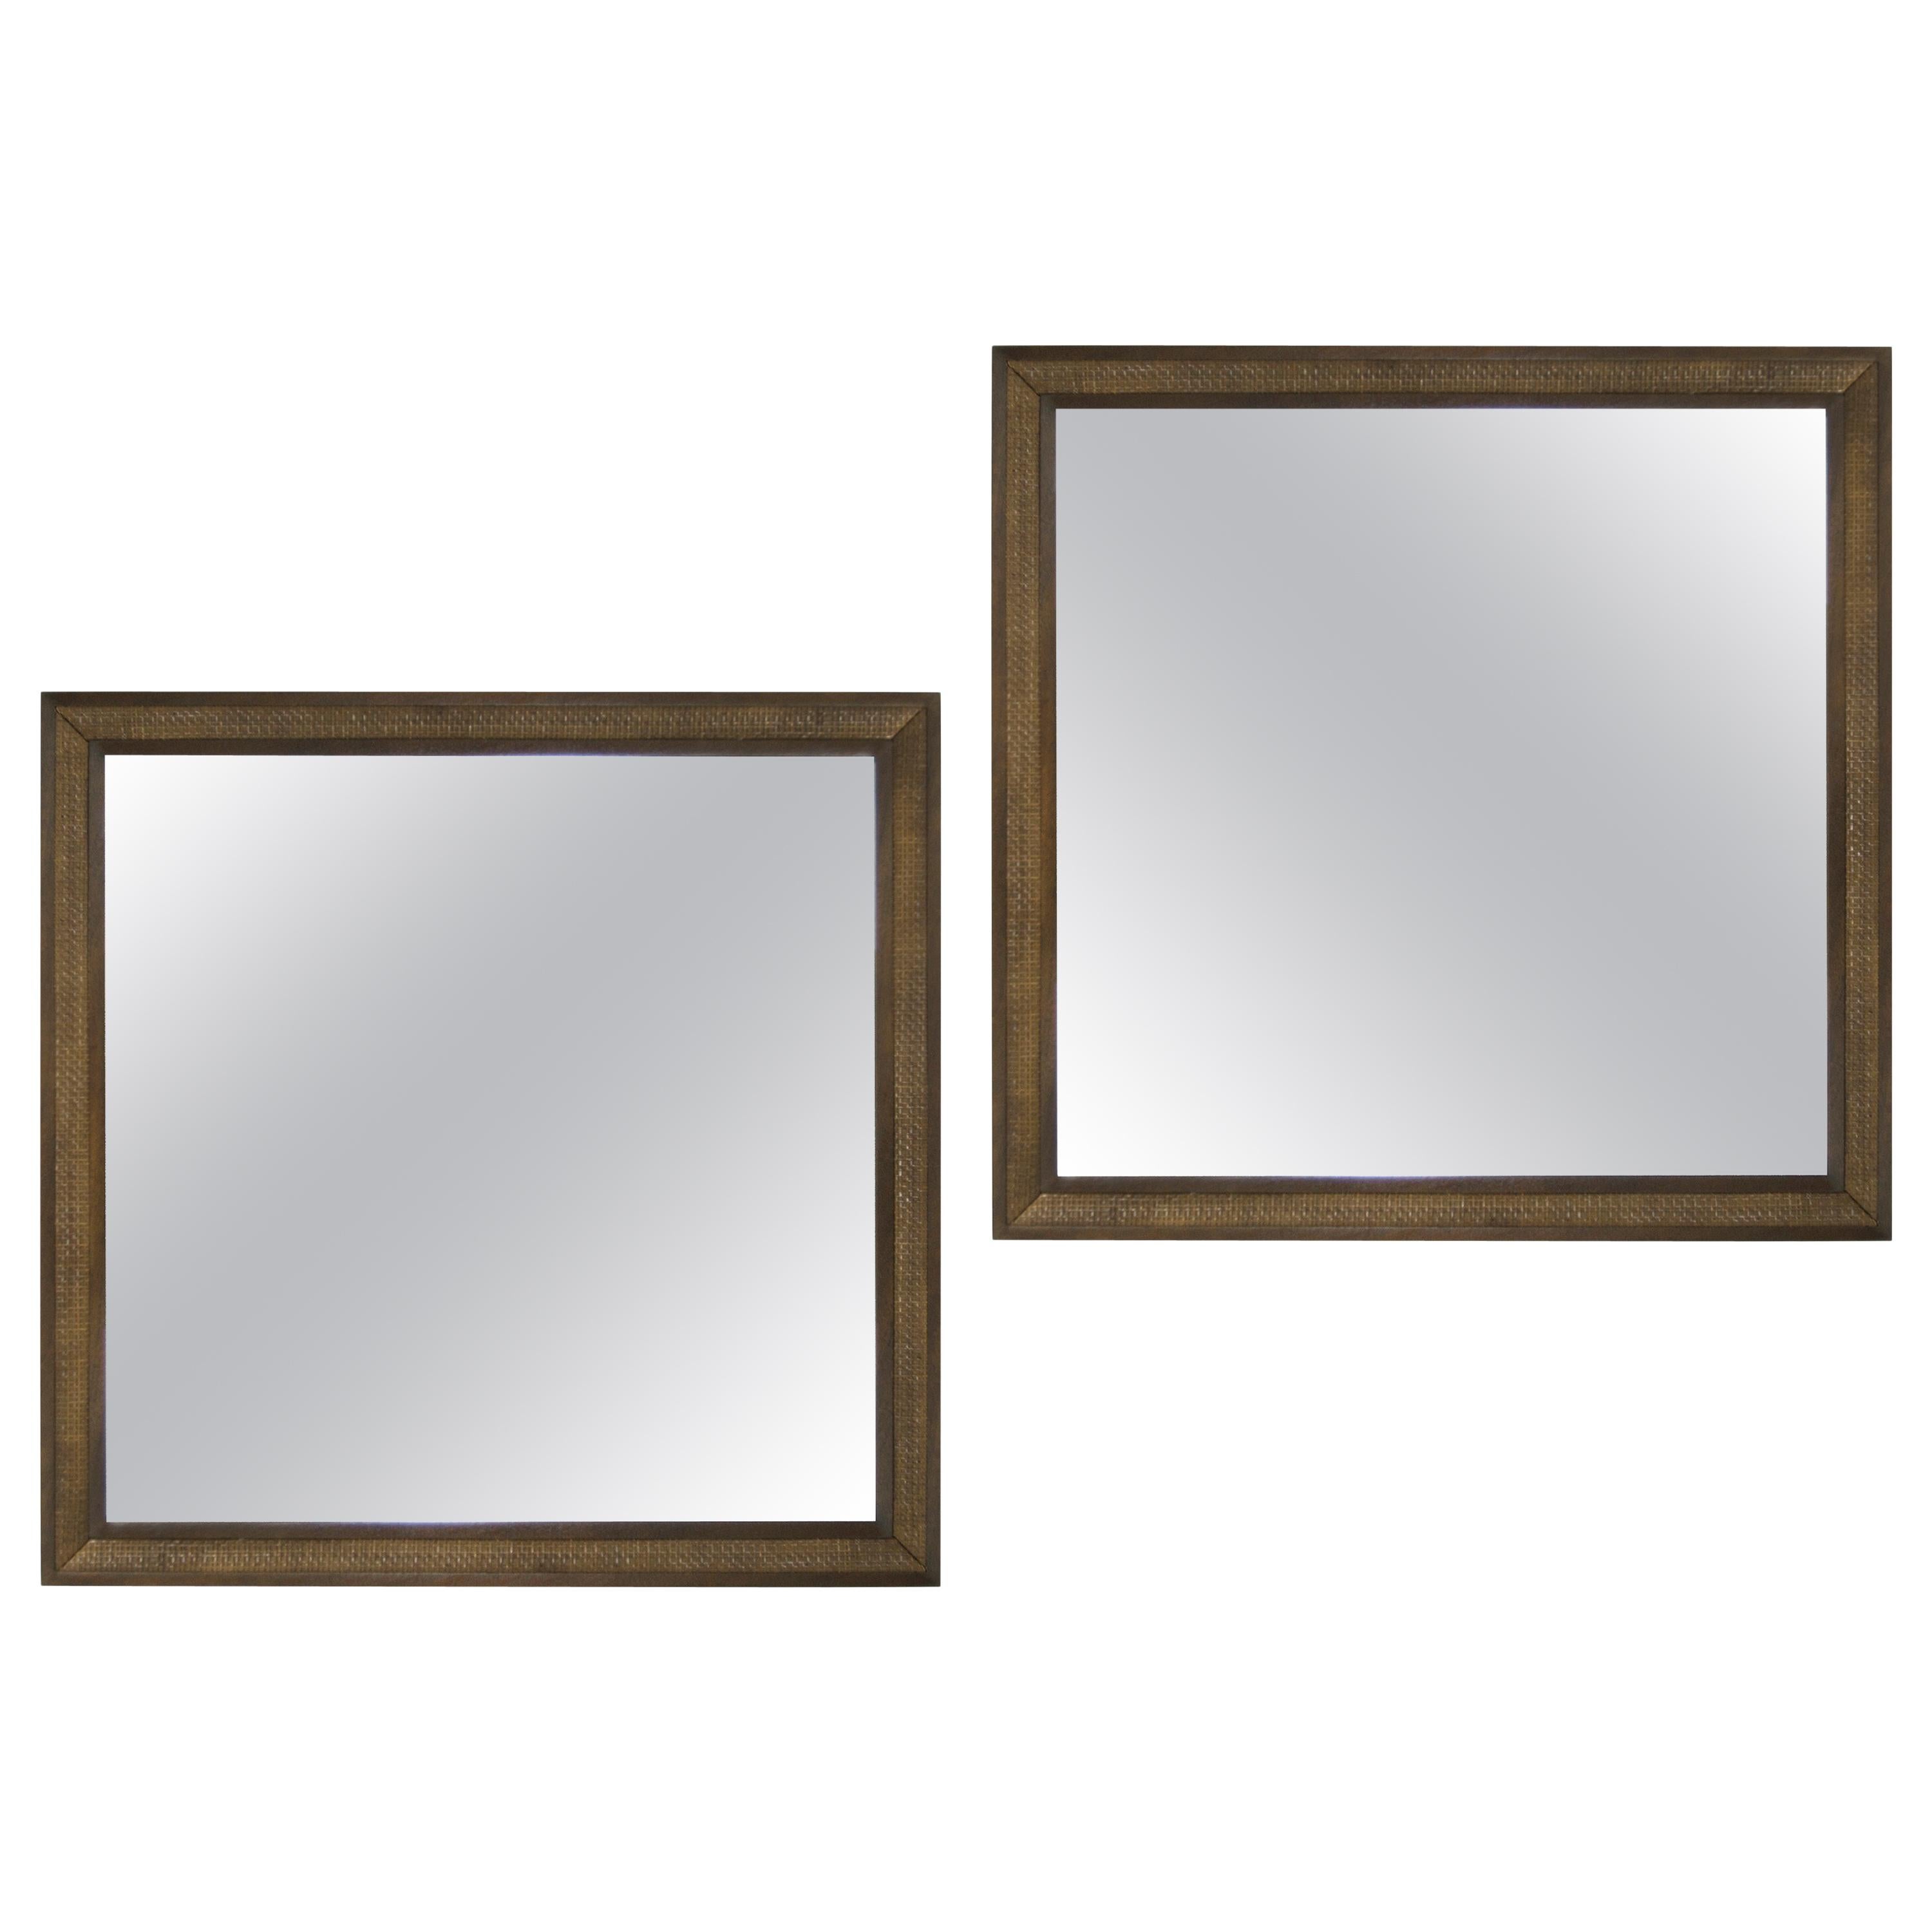 Set of Matching Mirrors by Edward Wormley for Dunbar, 1950s